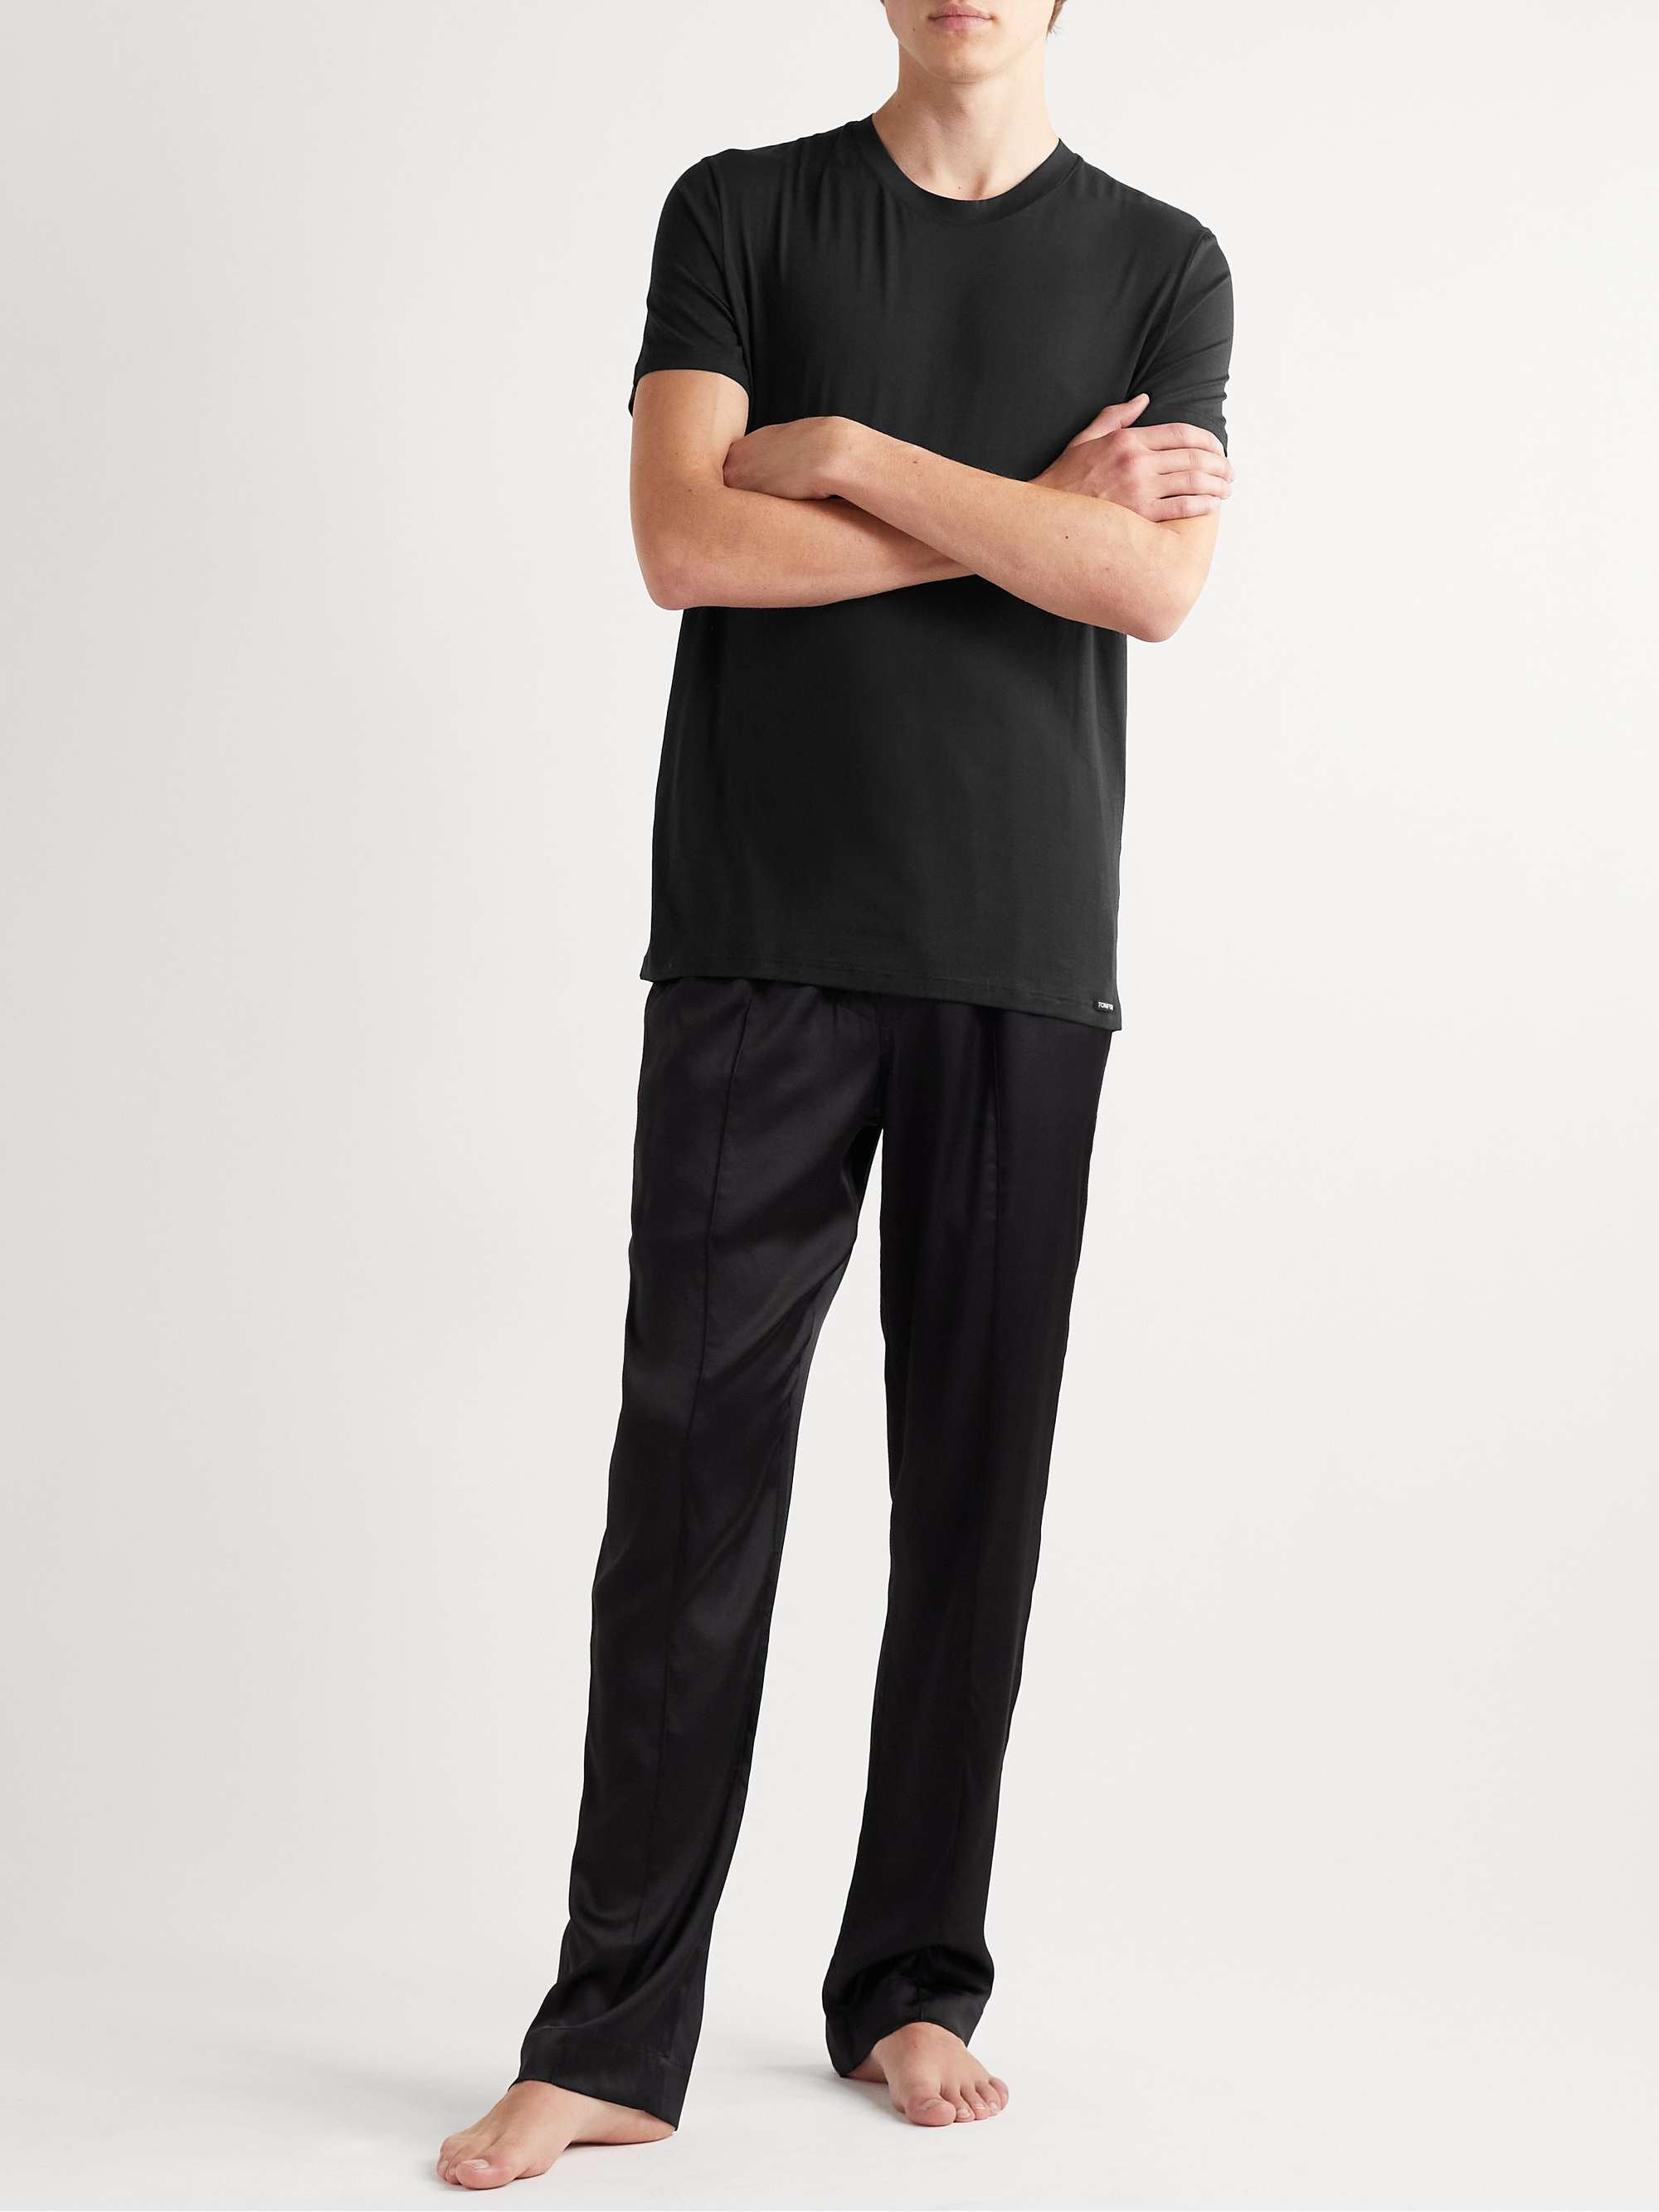 TOM FORD Stretch Cotton and Modal-Blend T-Shirt